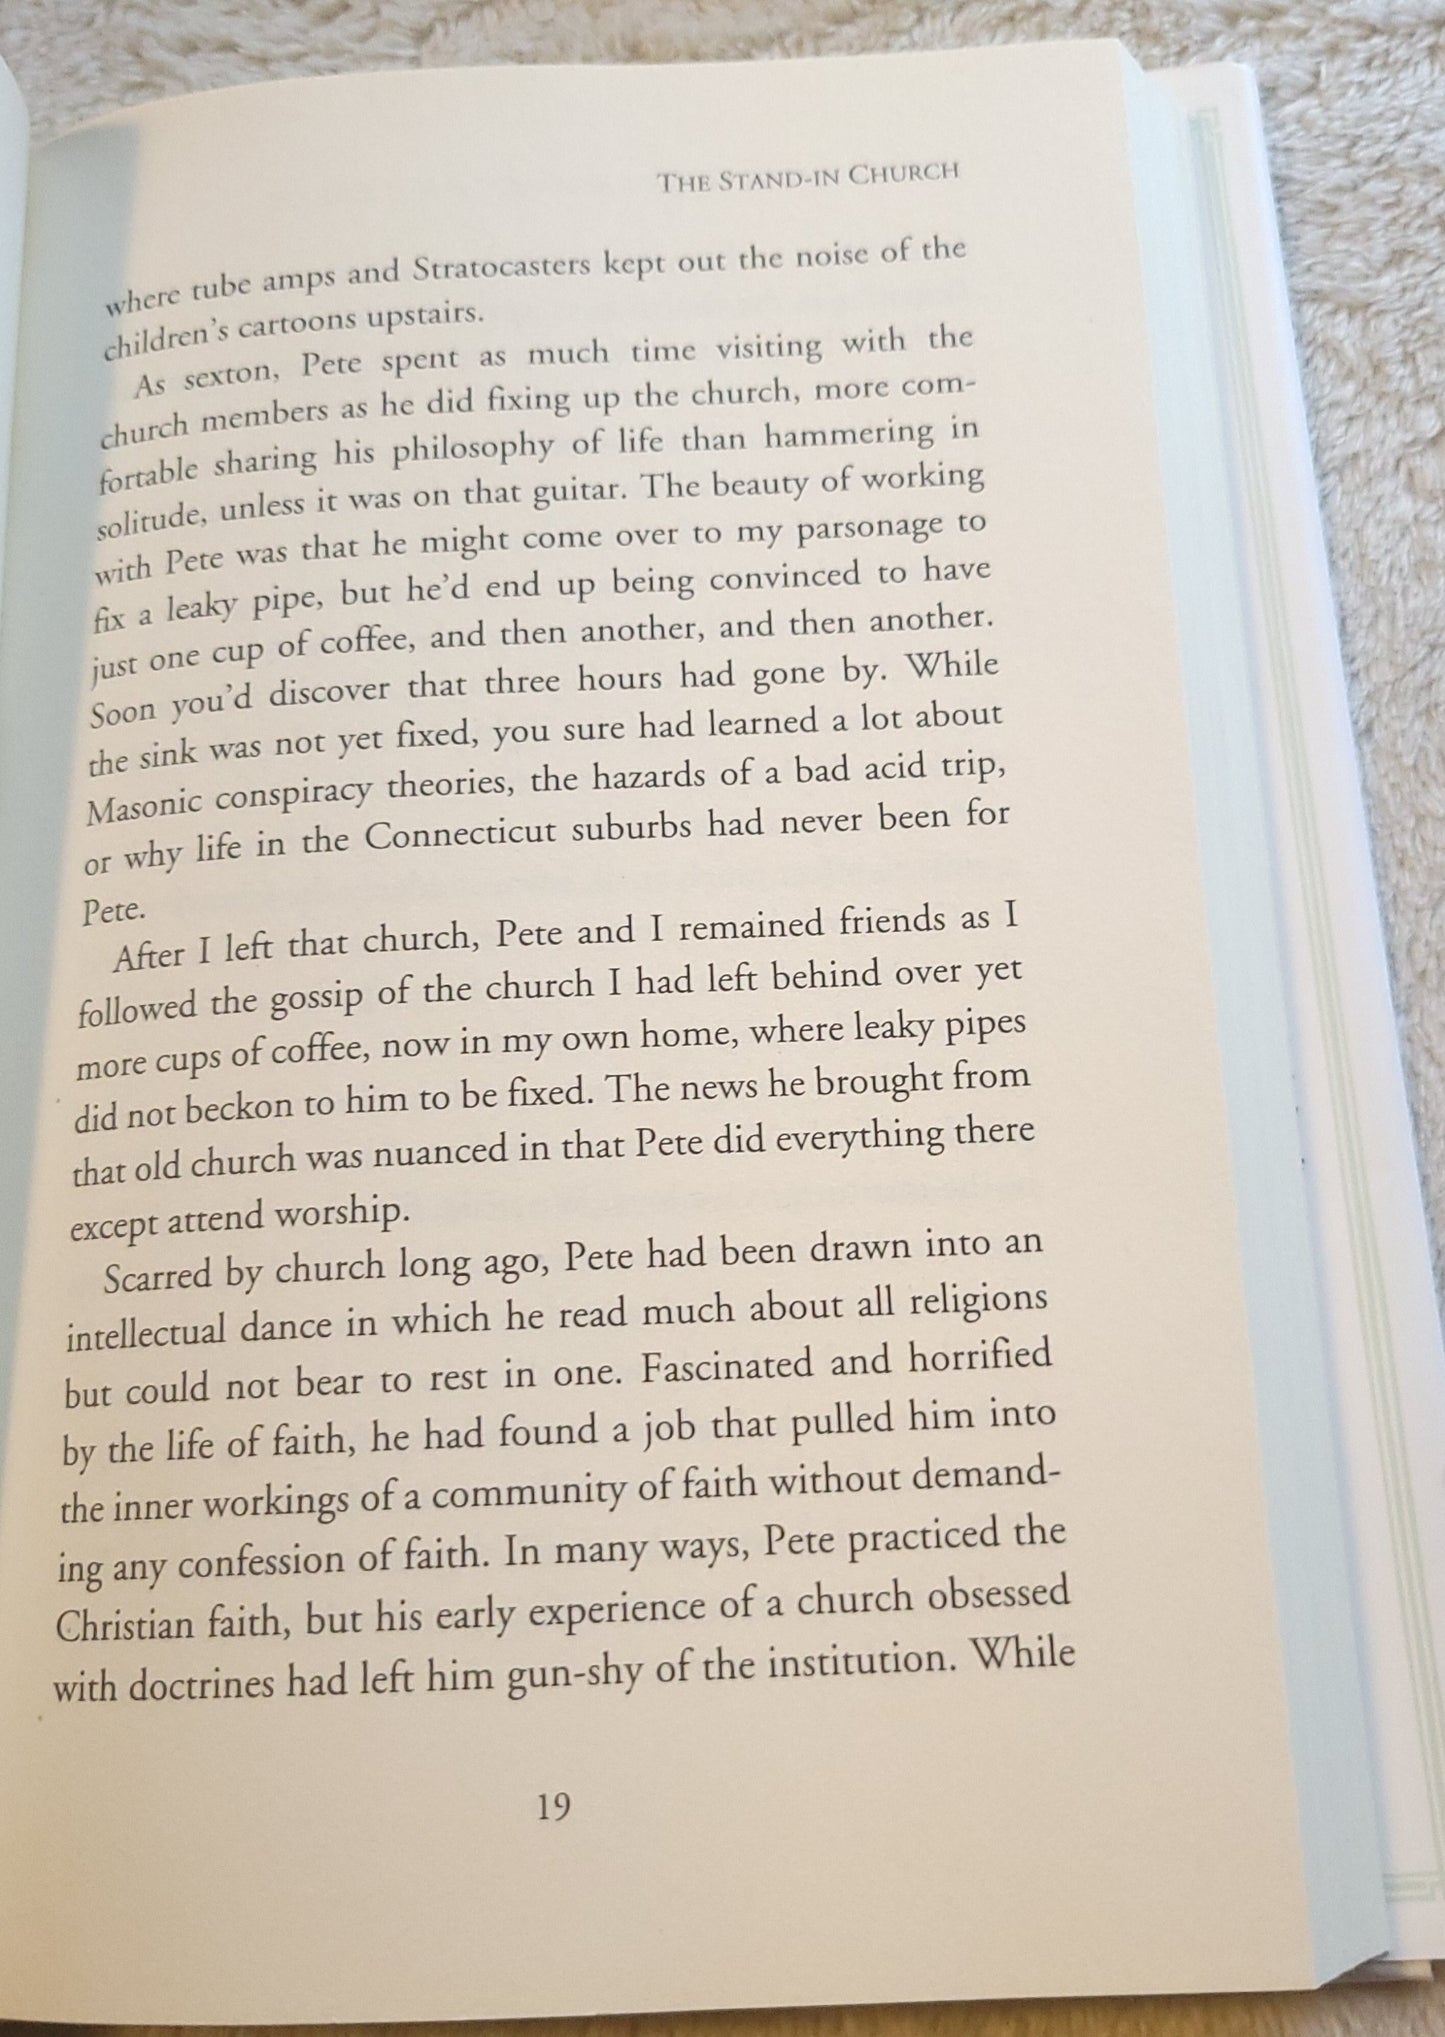 Used book for sale "When "Spiritual but Not Religious" Is Not Enough: Seeing God in Surprising Places, Even the Church" by Lillian Daniel, published by Jericho Books, 2014. Page 19